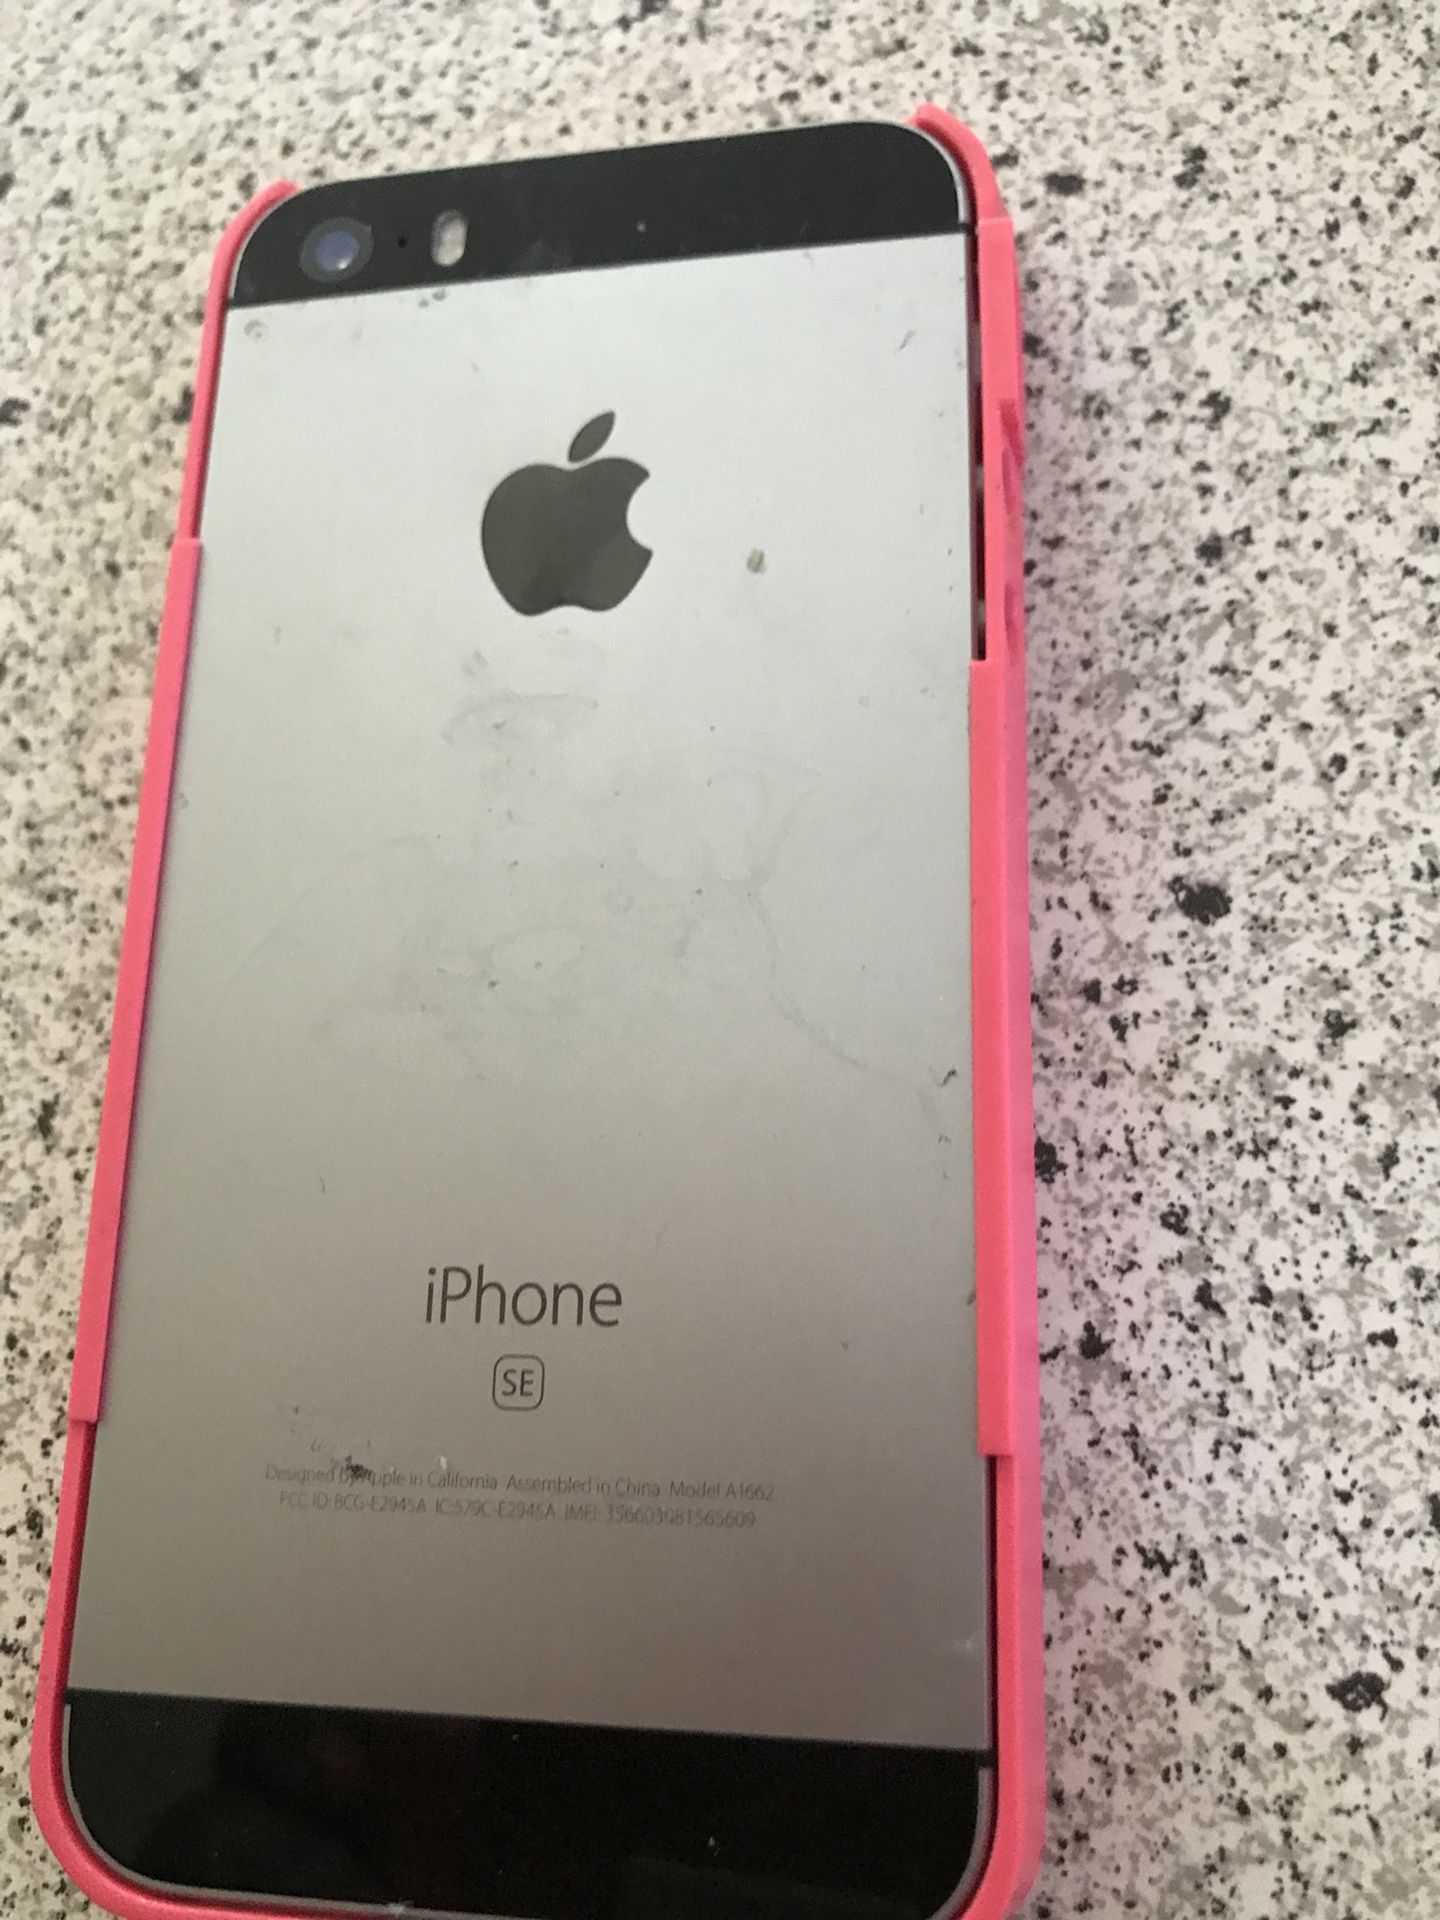 iPhone SE for sale - less than 1 yr old